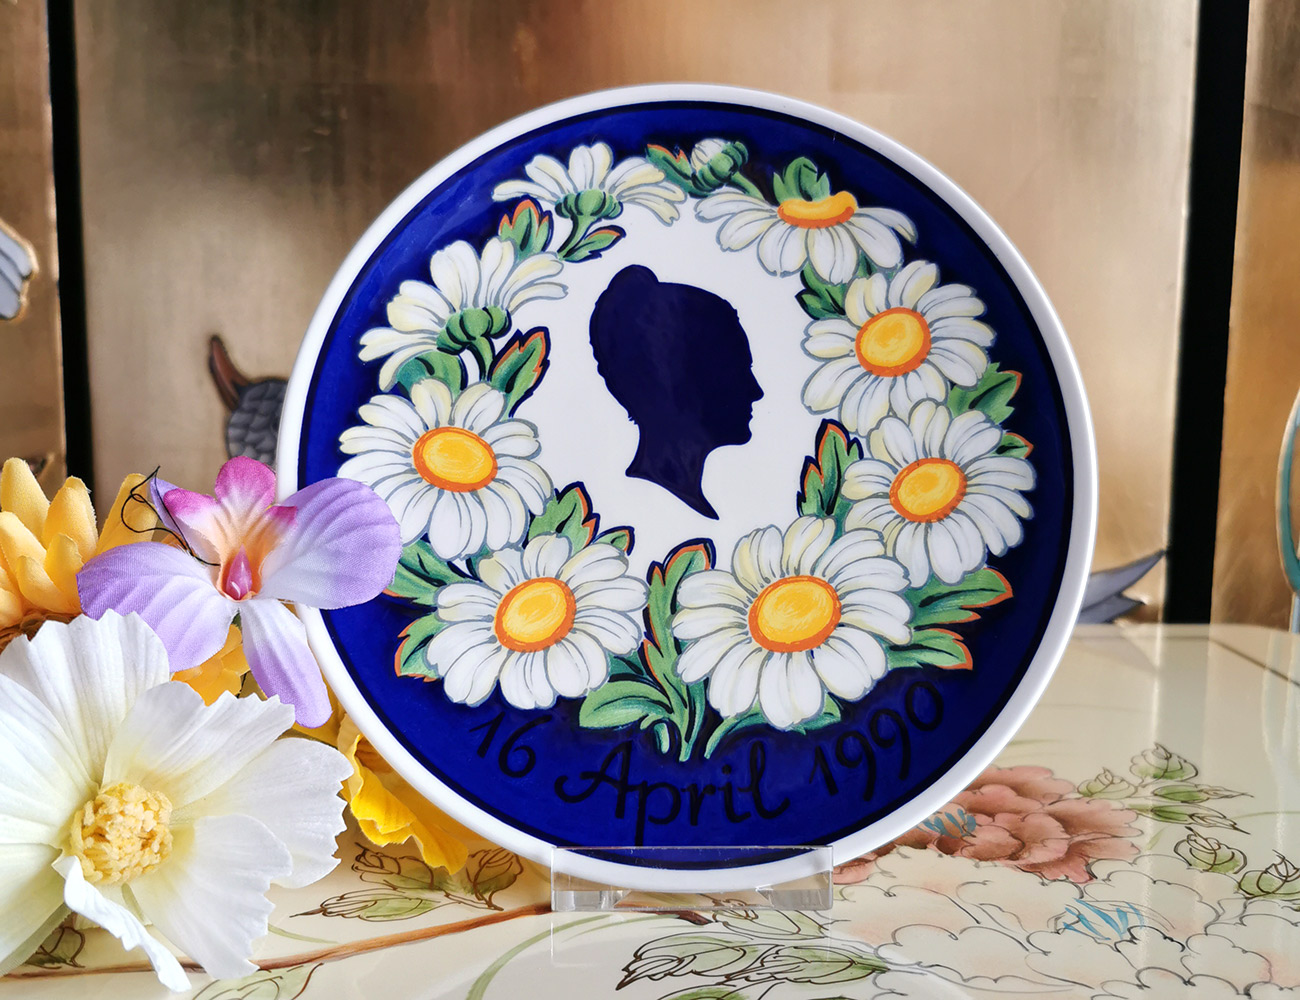 Royal Copenhagen Commemorative Plate, Queen Margrethe, produced in connection with Queen Margrethe's 50th birthday.